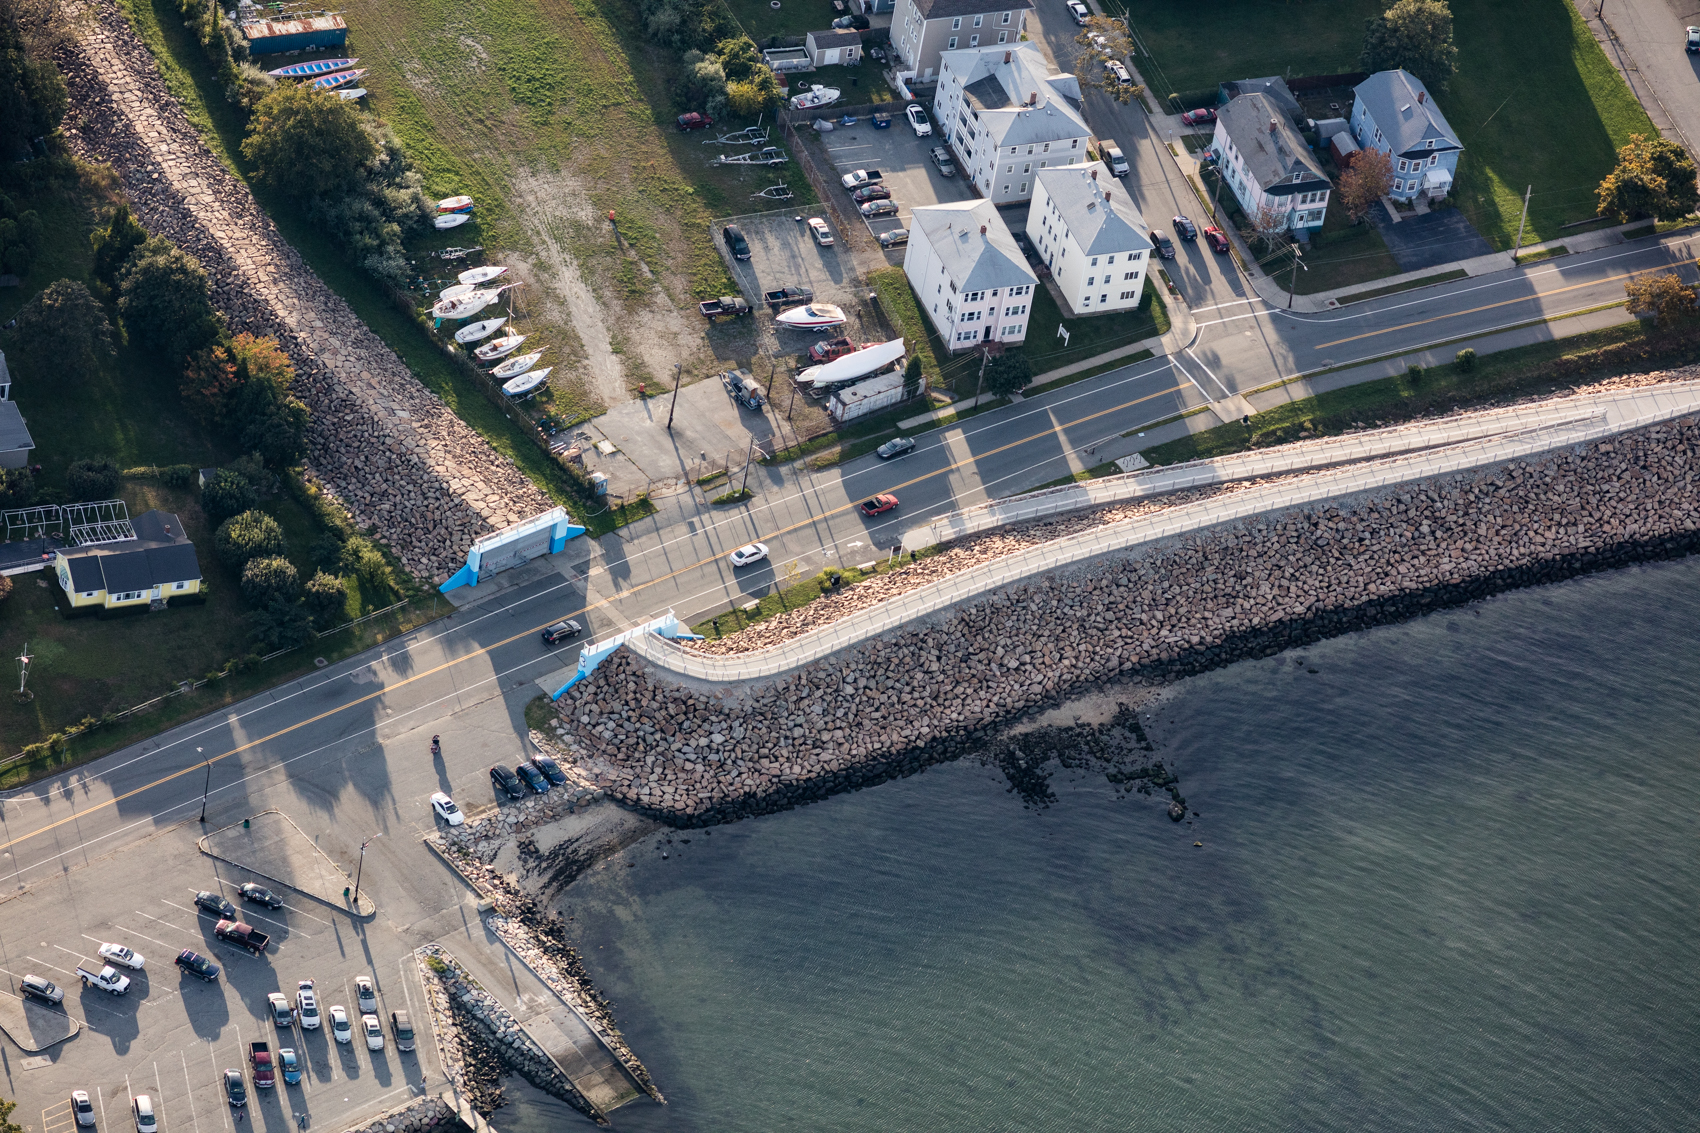 Following storms in the first half of the 20th Century, New Bedford, Massachusetts began construction a 3.5 mile dike in the form of a 20 foot high rock wall in 1962. The wall is designed to protect against a 16 foot storm surge, equivalent to a category 3 storm, however if sea level rises 1-2 feet, the wall would be overwhelmed by category 3+ storms.